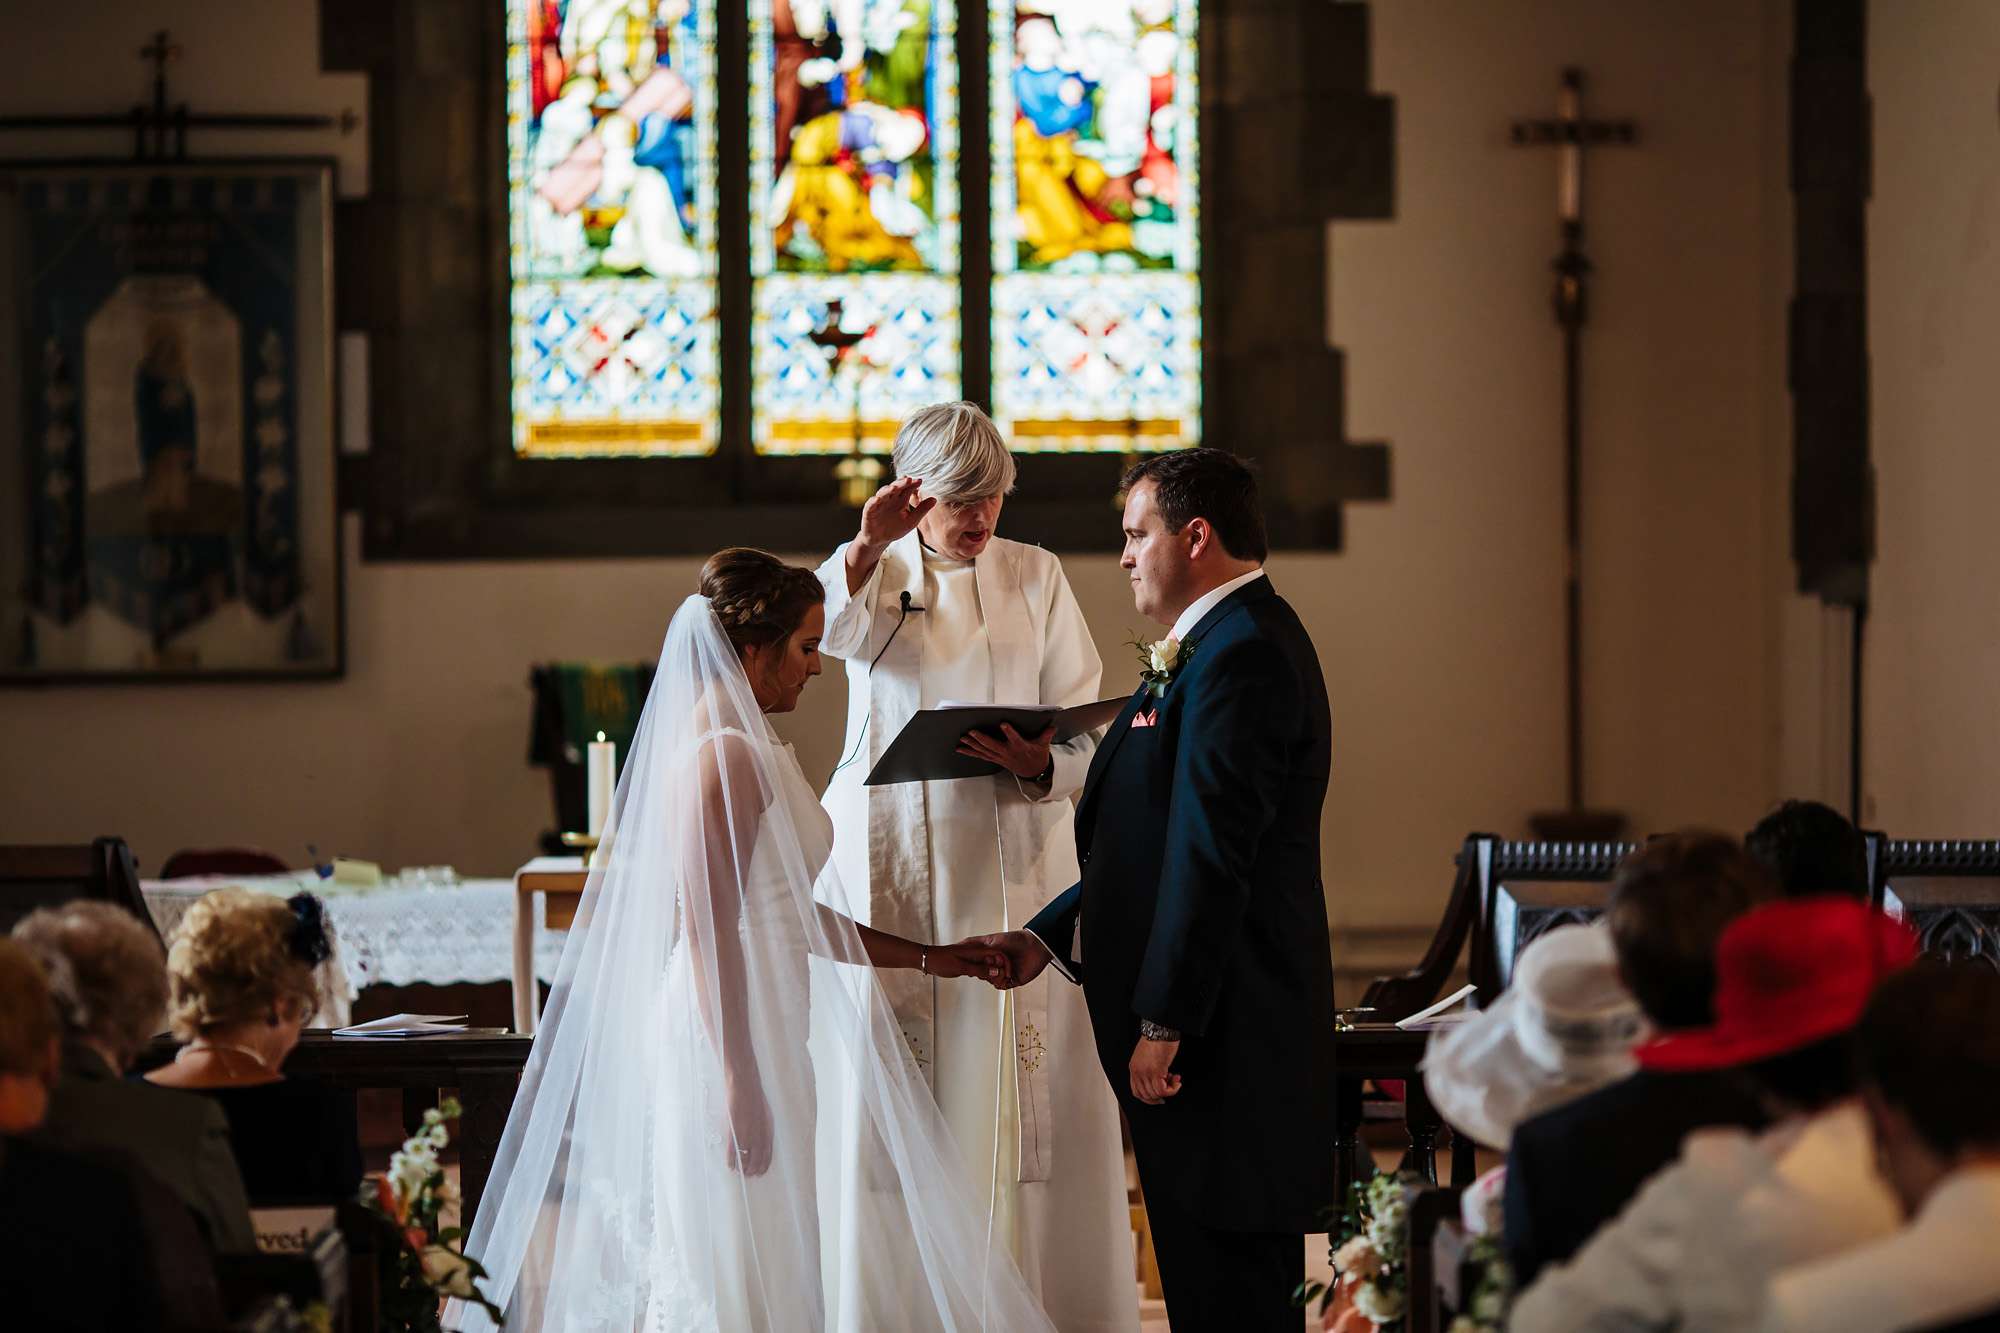 Blessing of the marriage at a church in Huddersfield